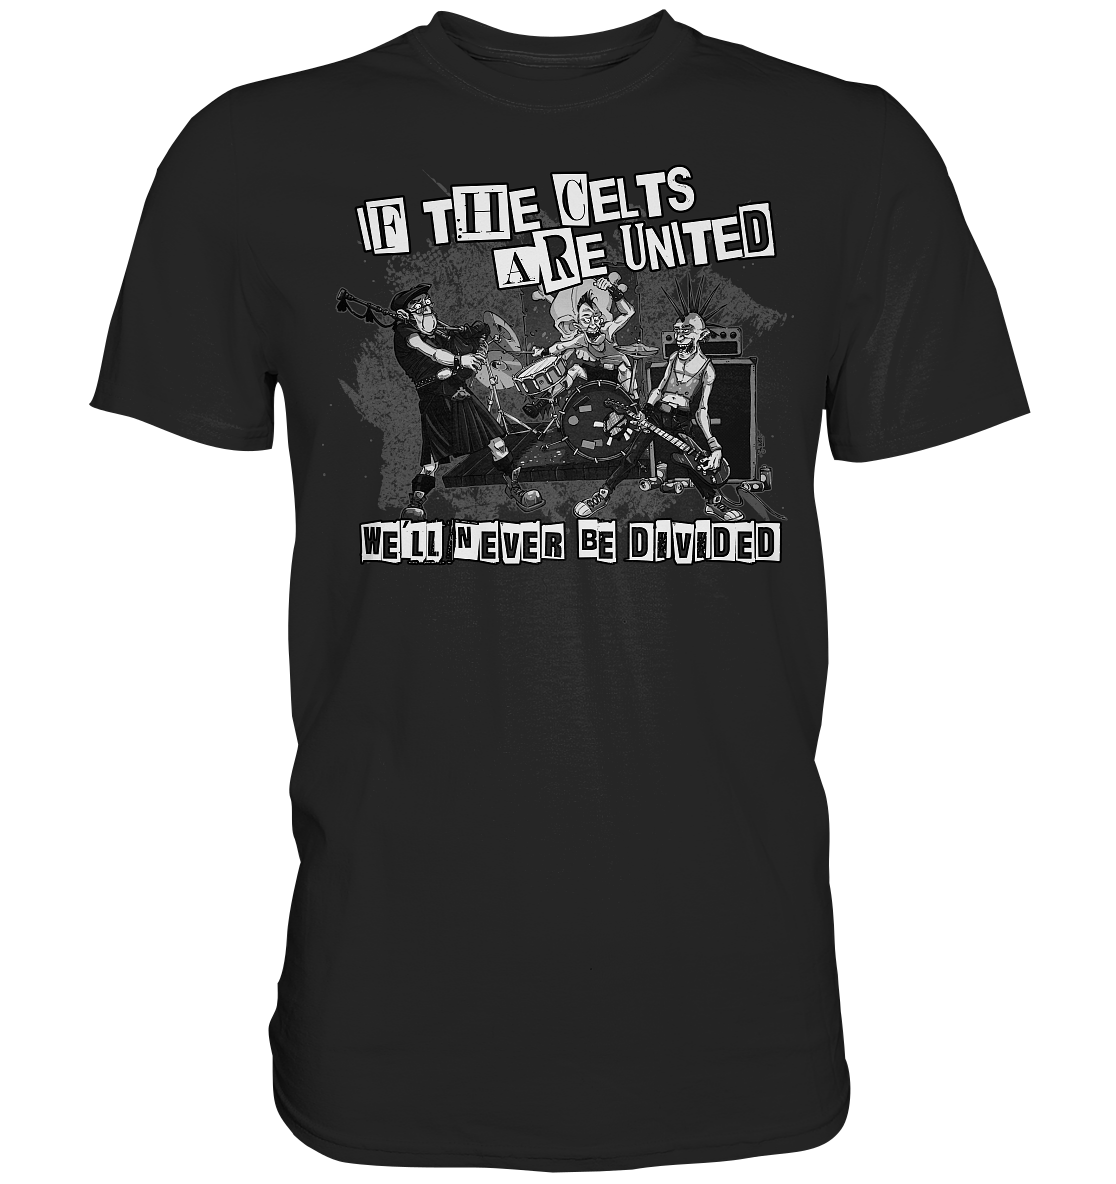 If The Celts Are United "We'll Never Be Divided" - Premium Shirt